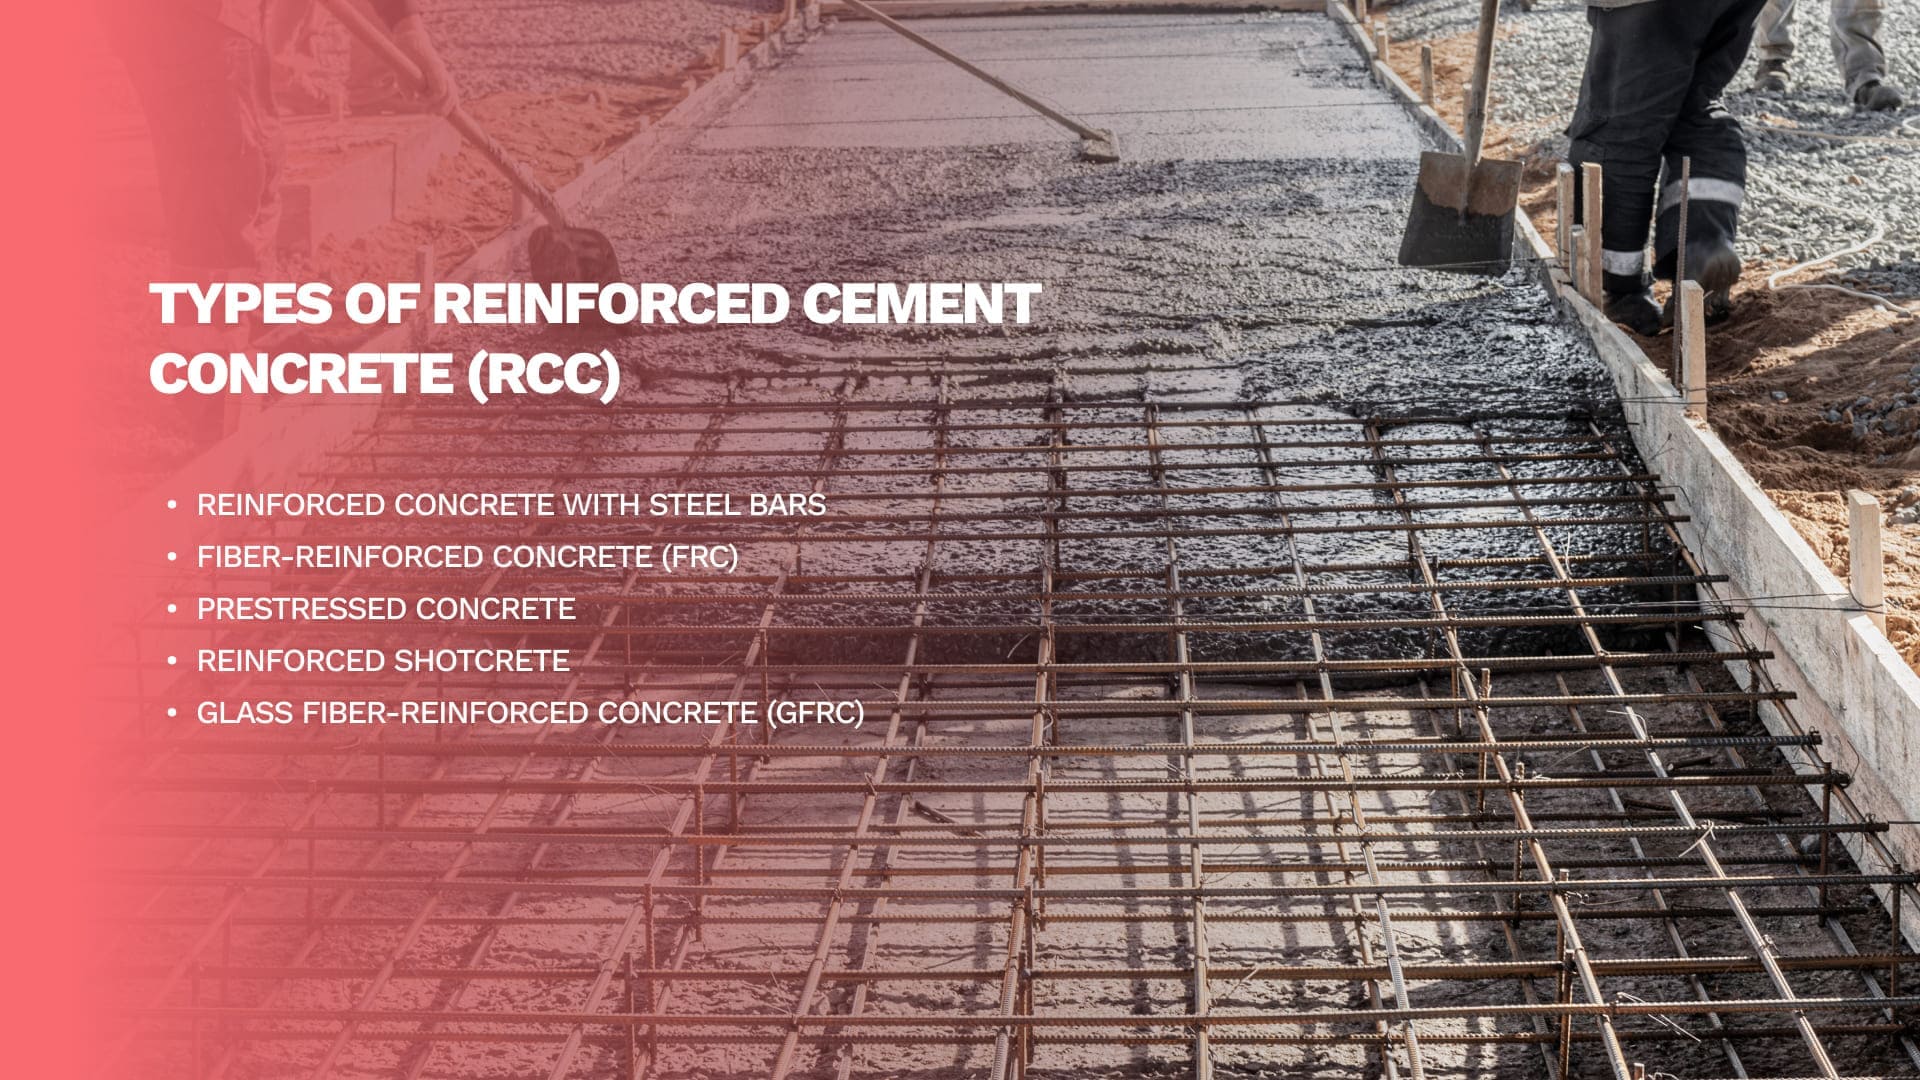 Types of Reinforced Cement Concrete (RCC)